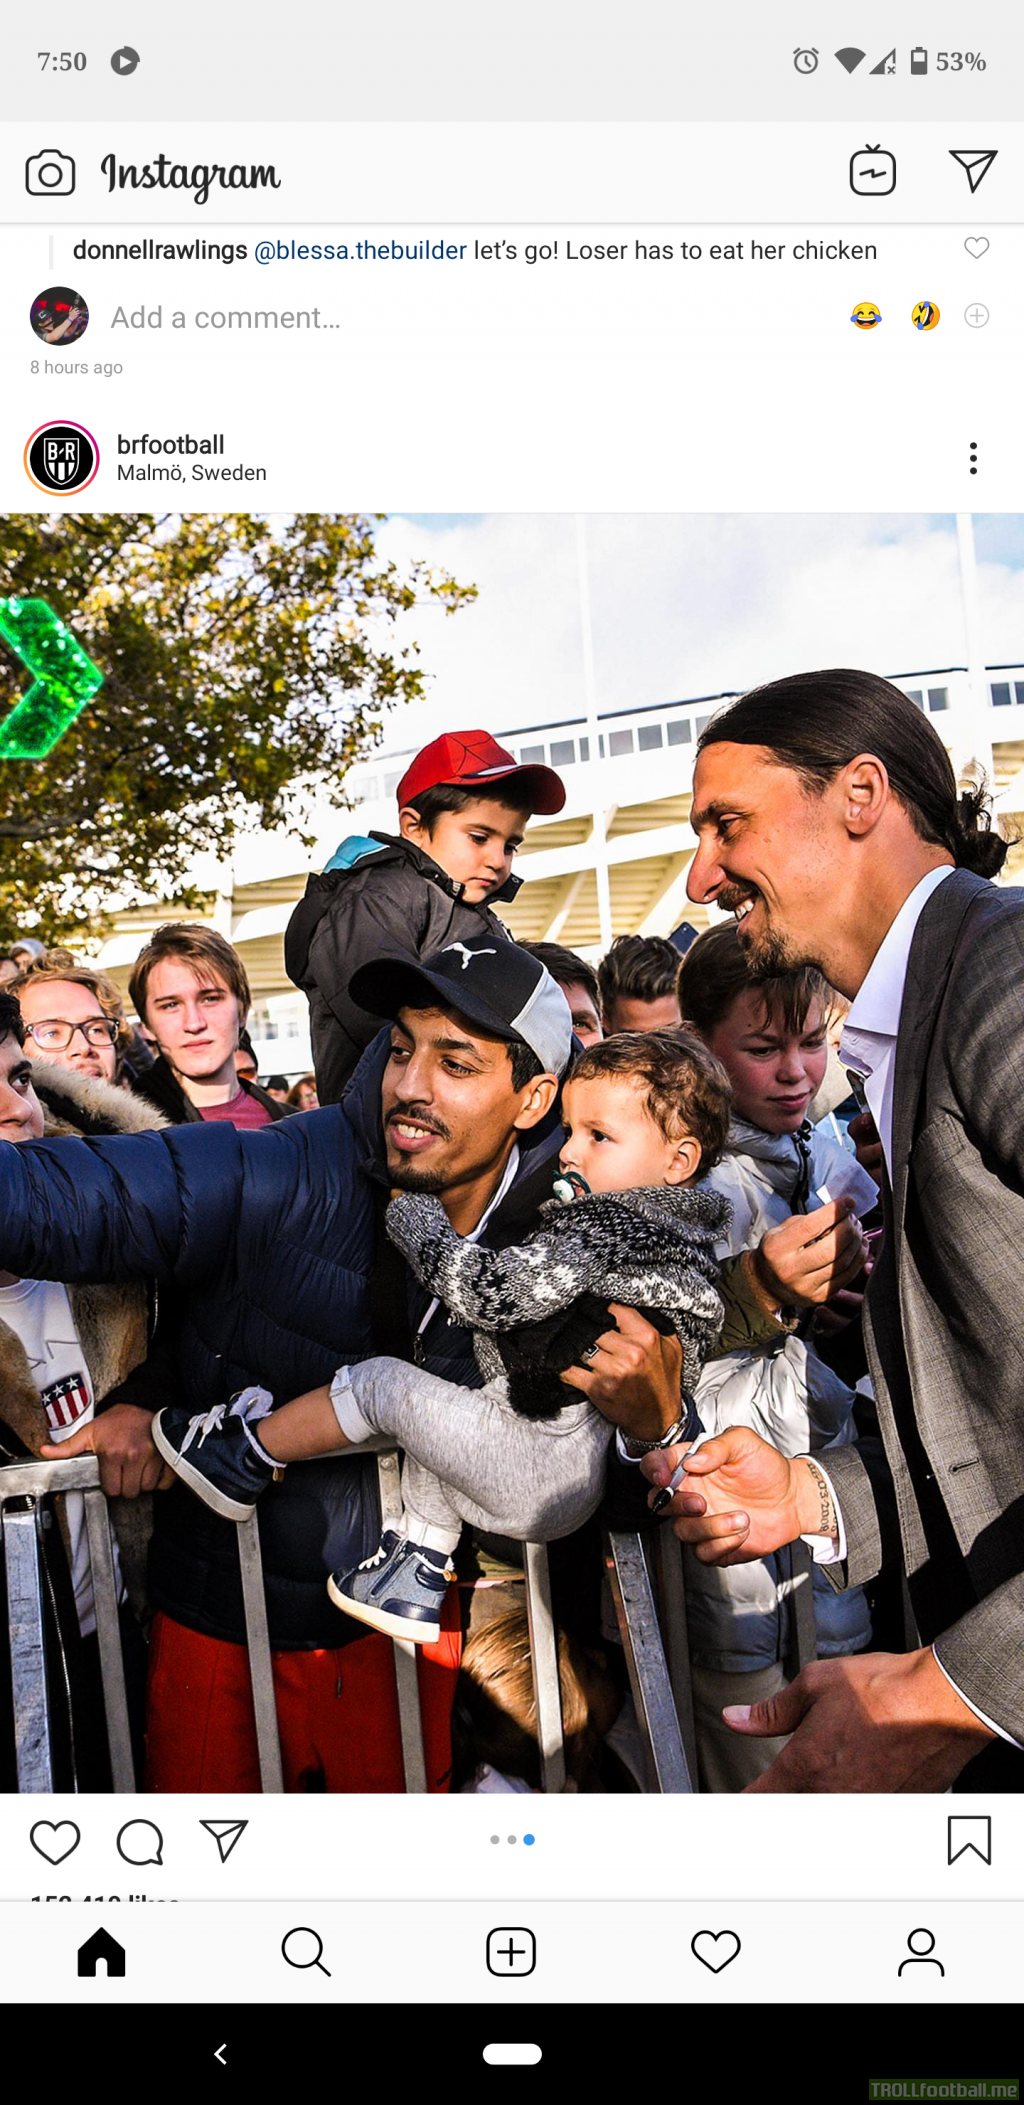 David Silva at the unveiling of the Zlatan statue in Sweden trying to get a chance to take a photo with his favorite player.